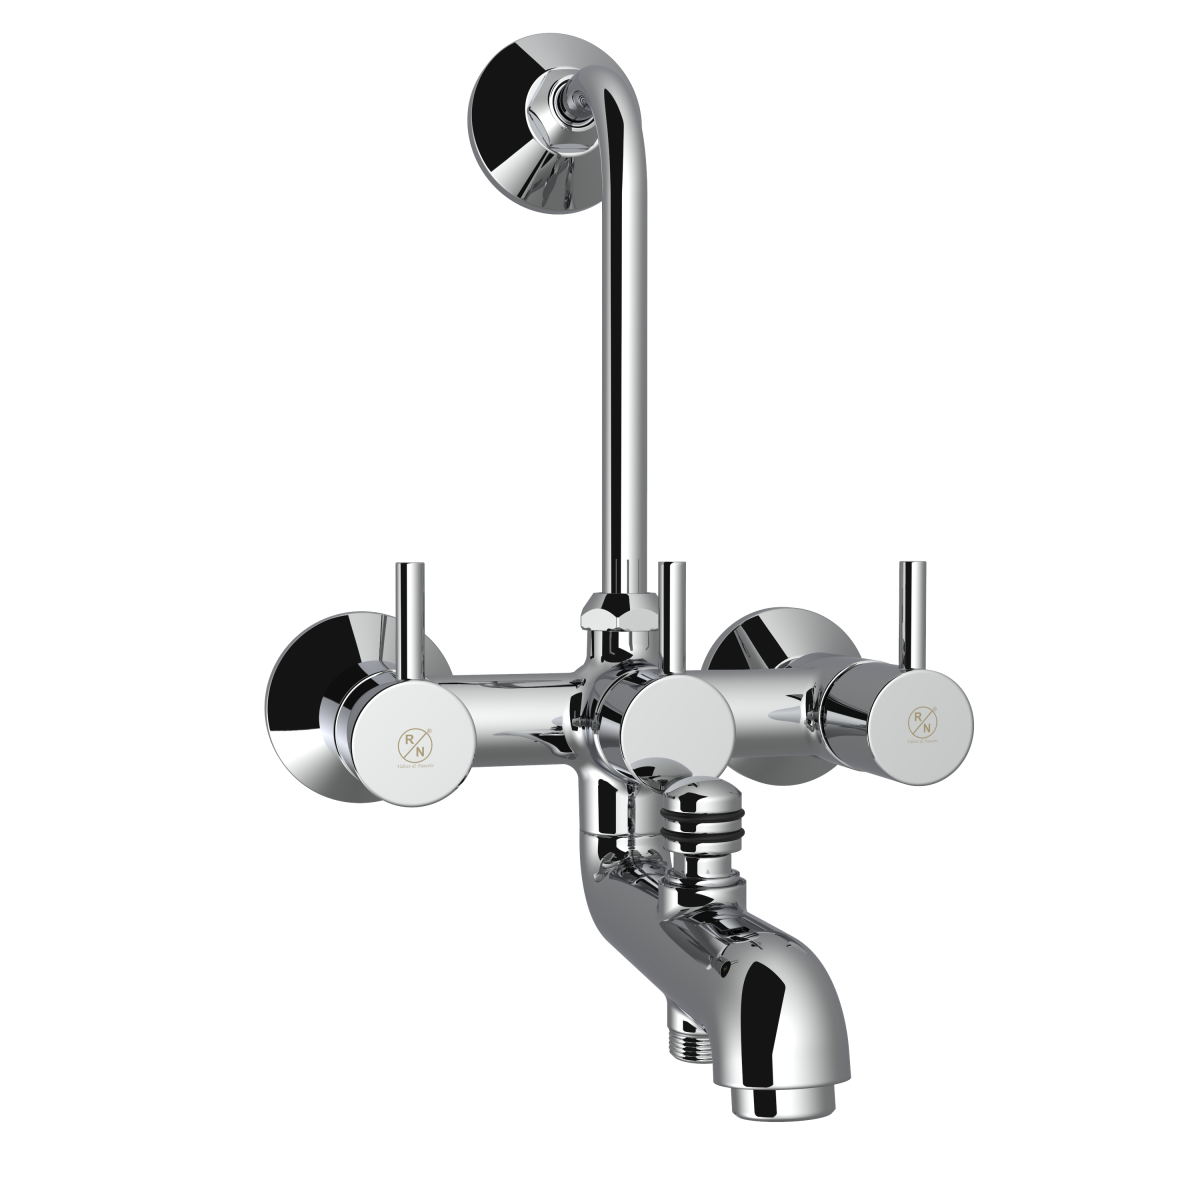 Wall Mixer Telephonic 3 In 1 With L Bend / Crutch